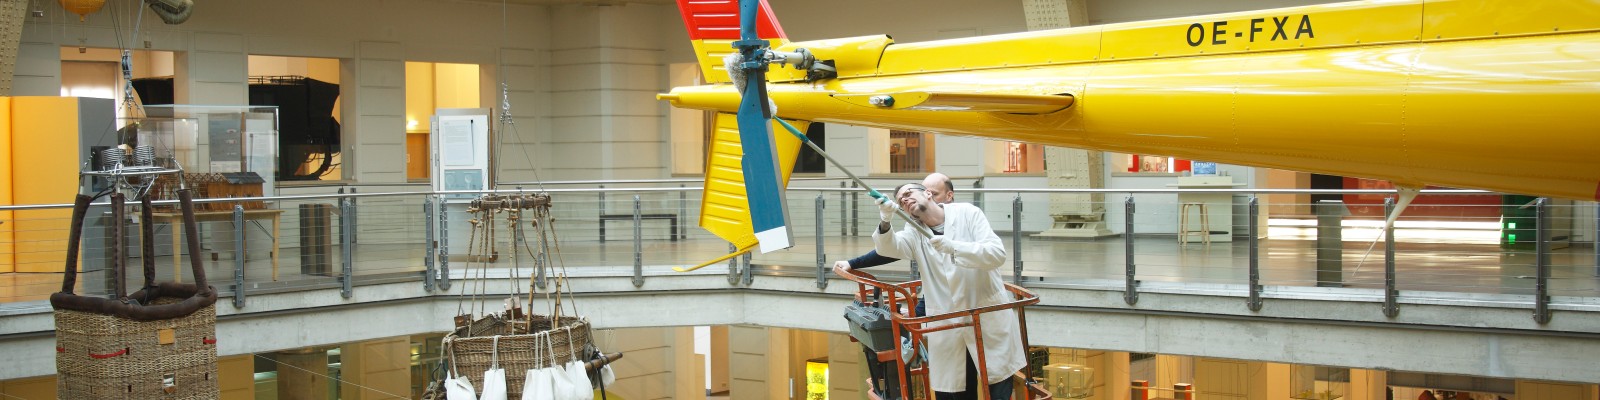 Members of the restauration department’s staff cleaning the ÖAMTC’s (Austrian motoring association) rescue helicopter using an aerial work platform / Object cleaning in the collection on display